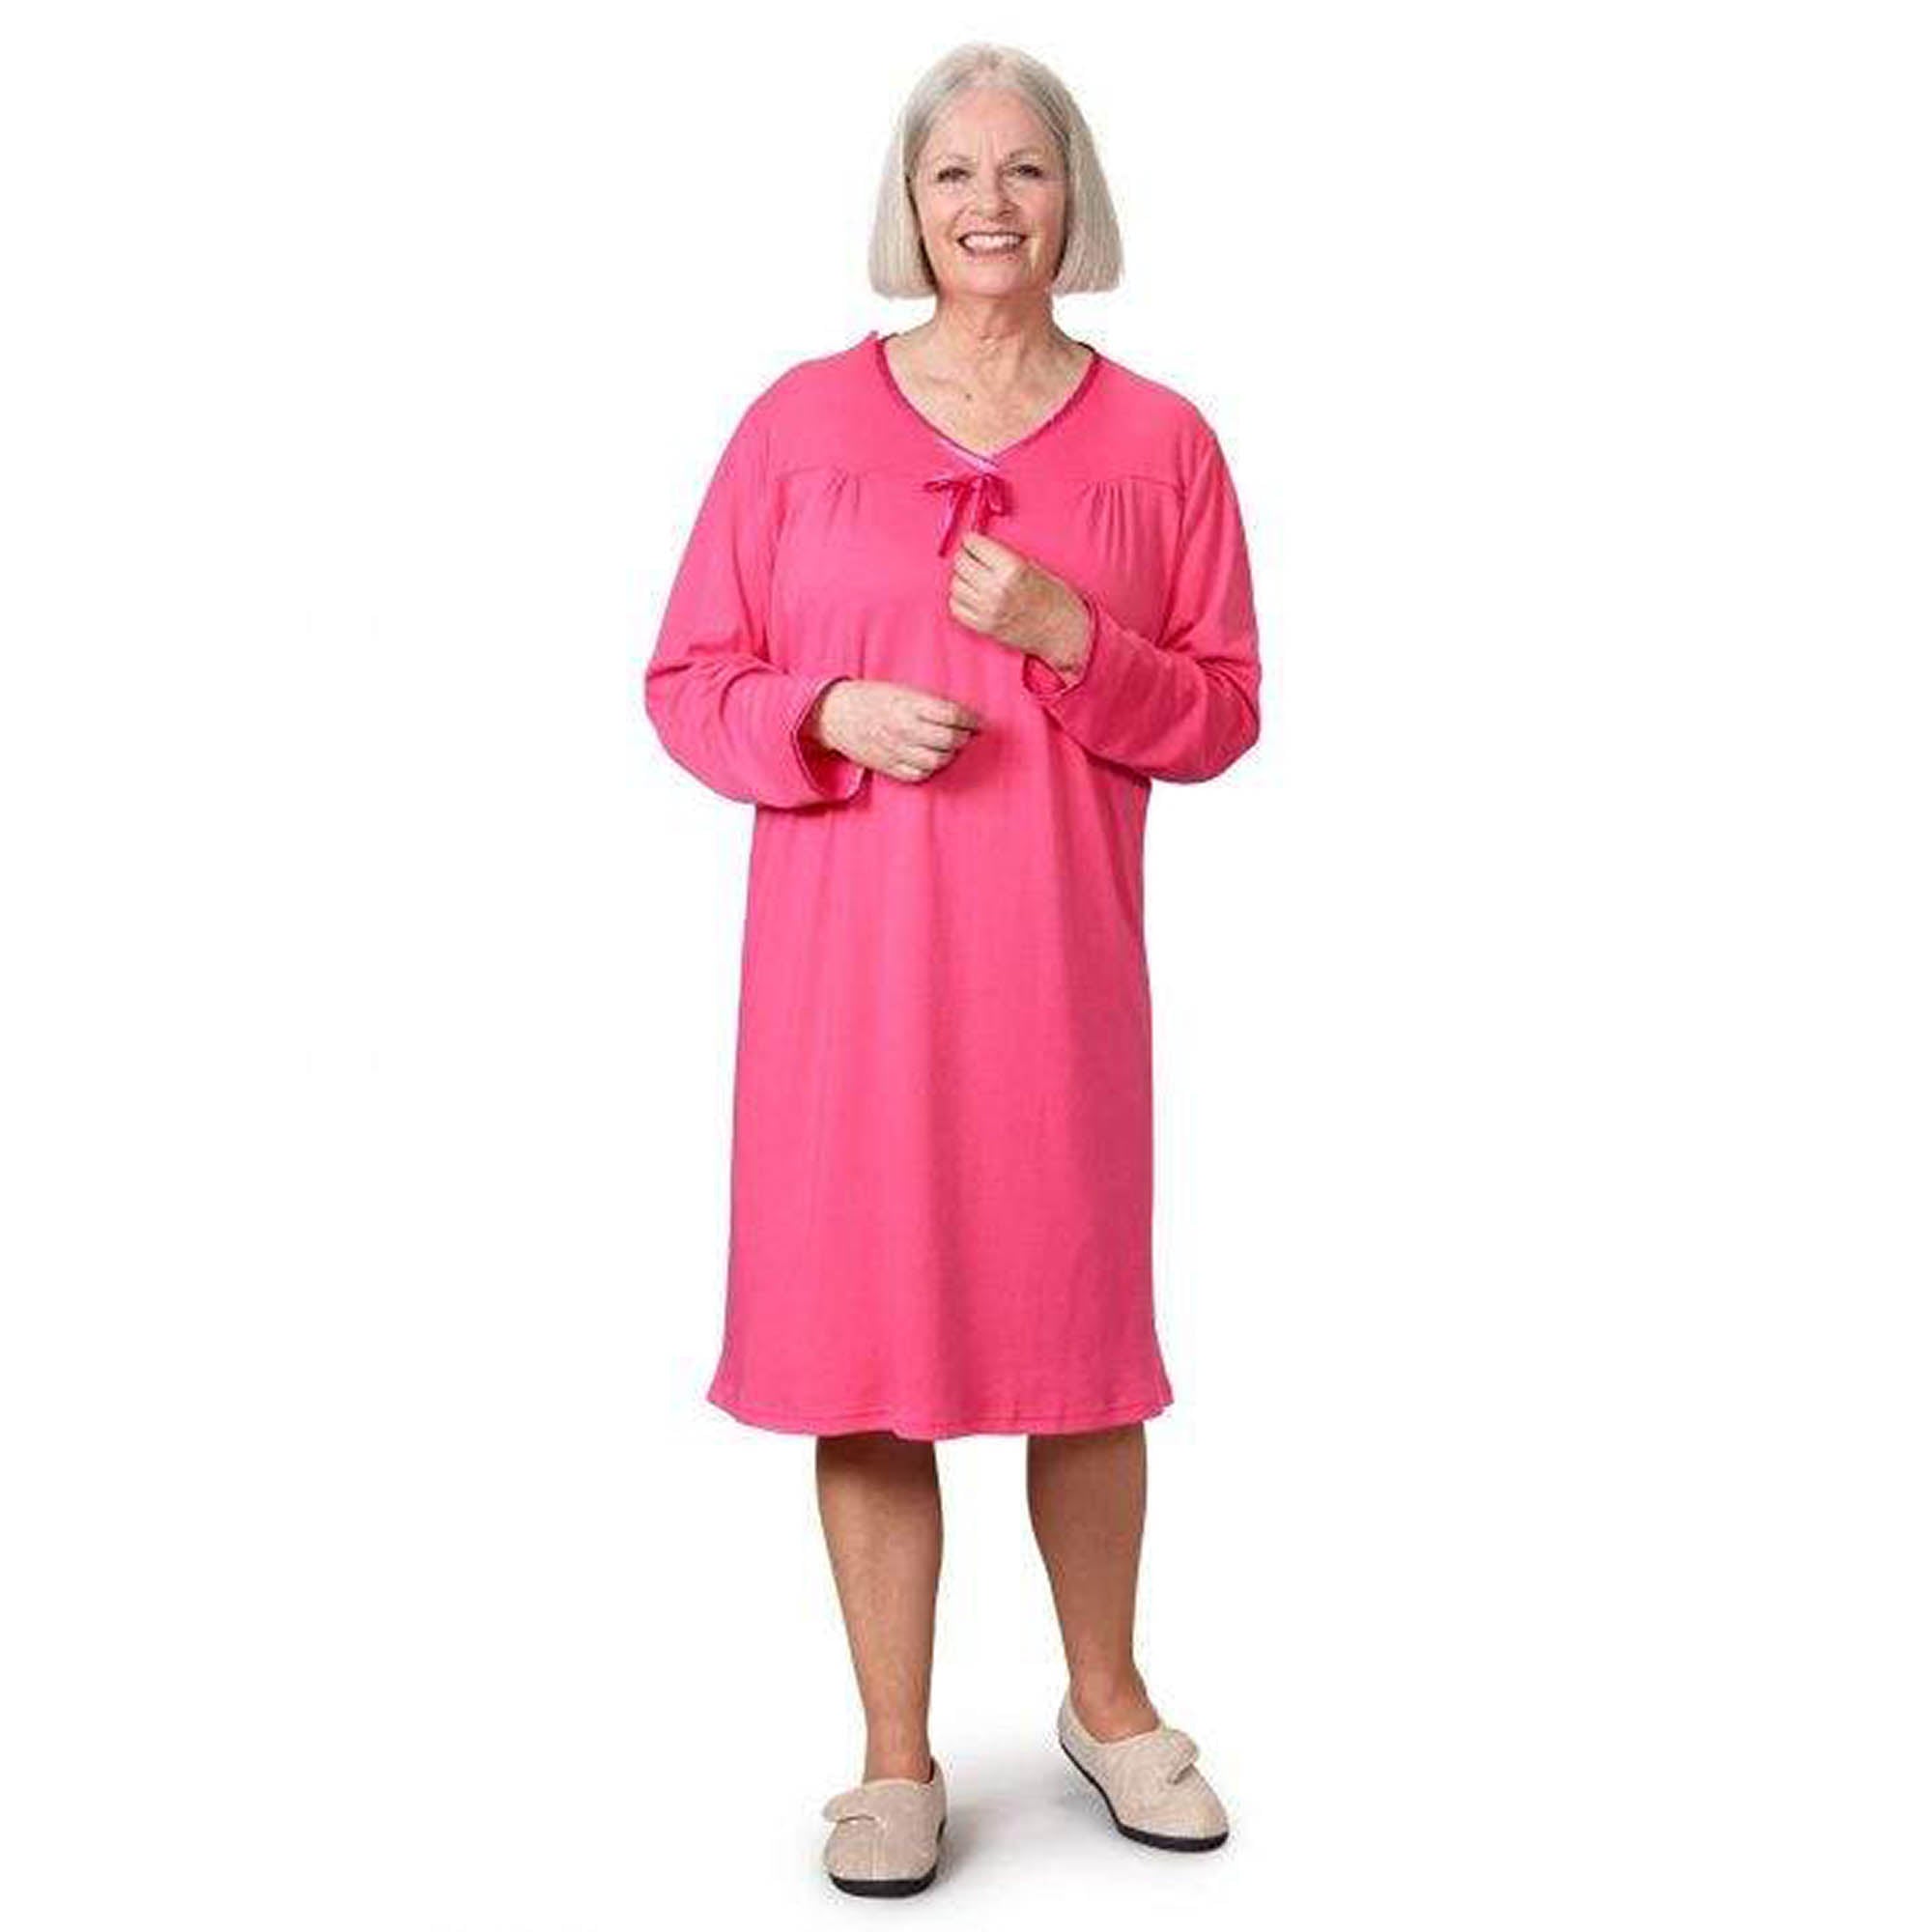 Silverts Women's Open Back Antimicrobial Long-sleeve Nightgown - Adaptive Clothing - Pink - S